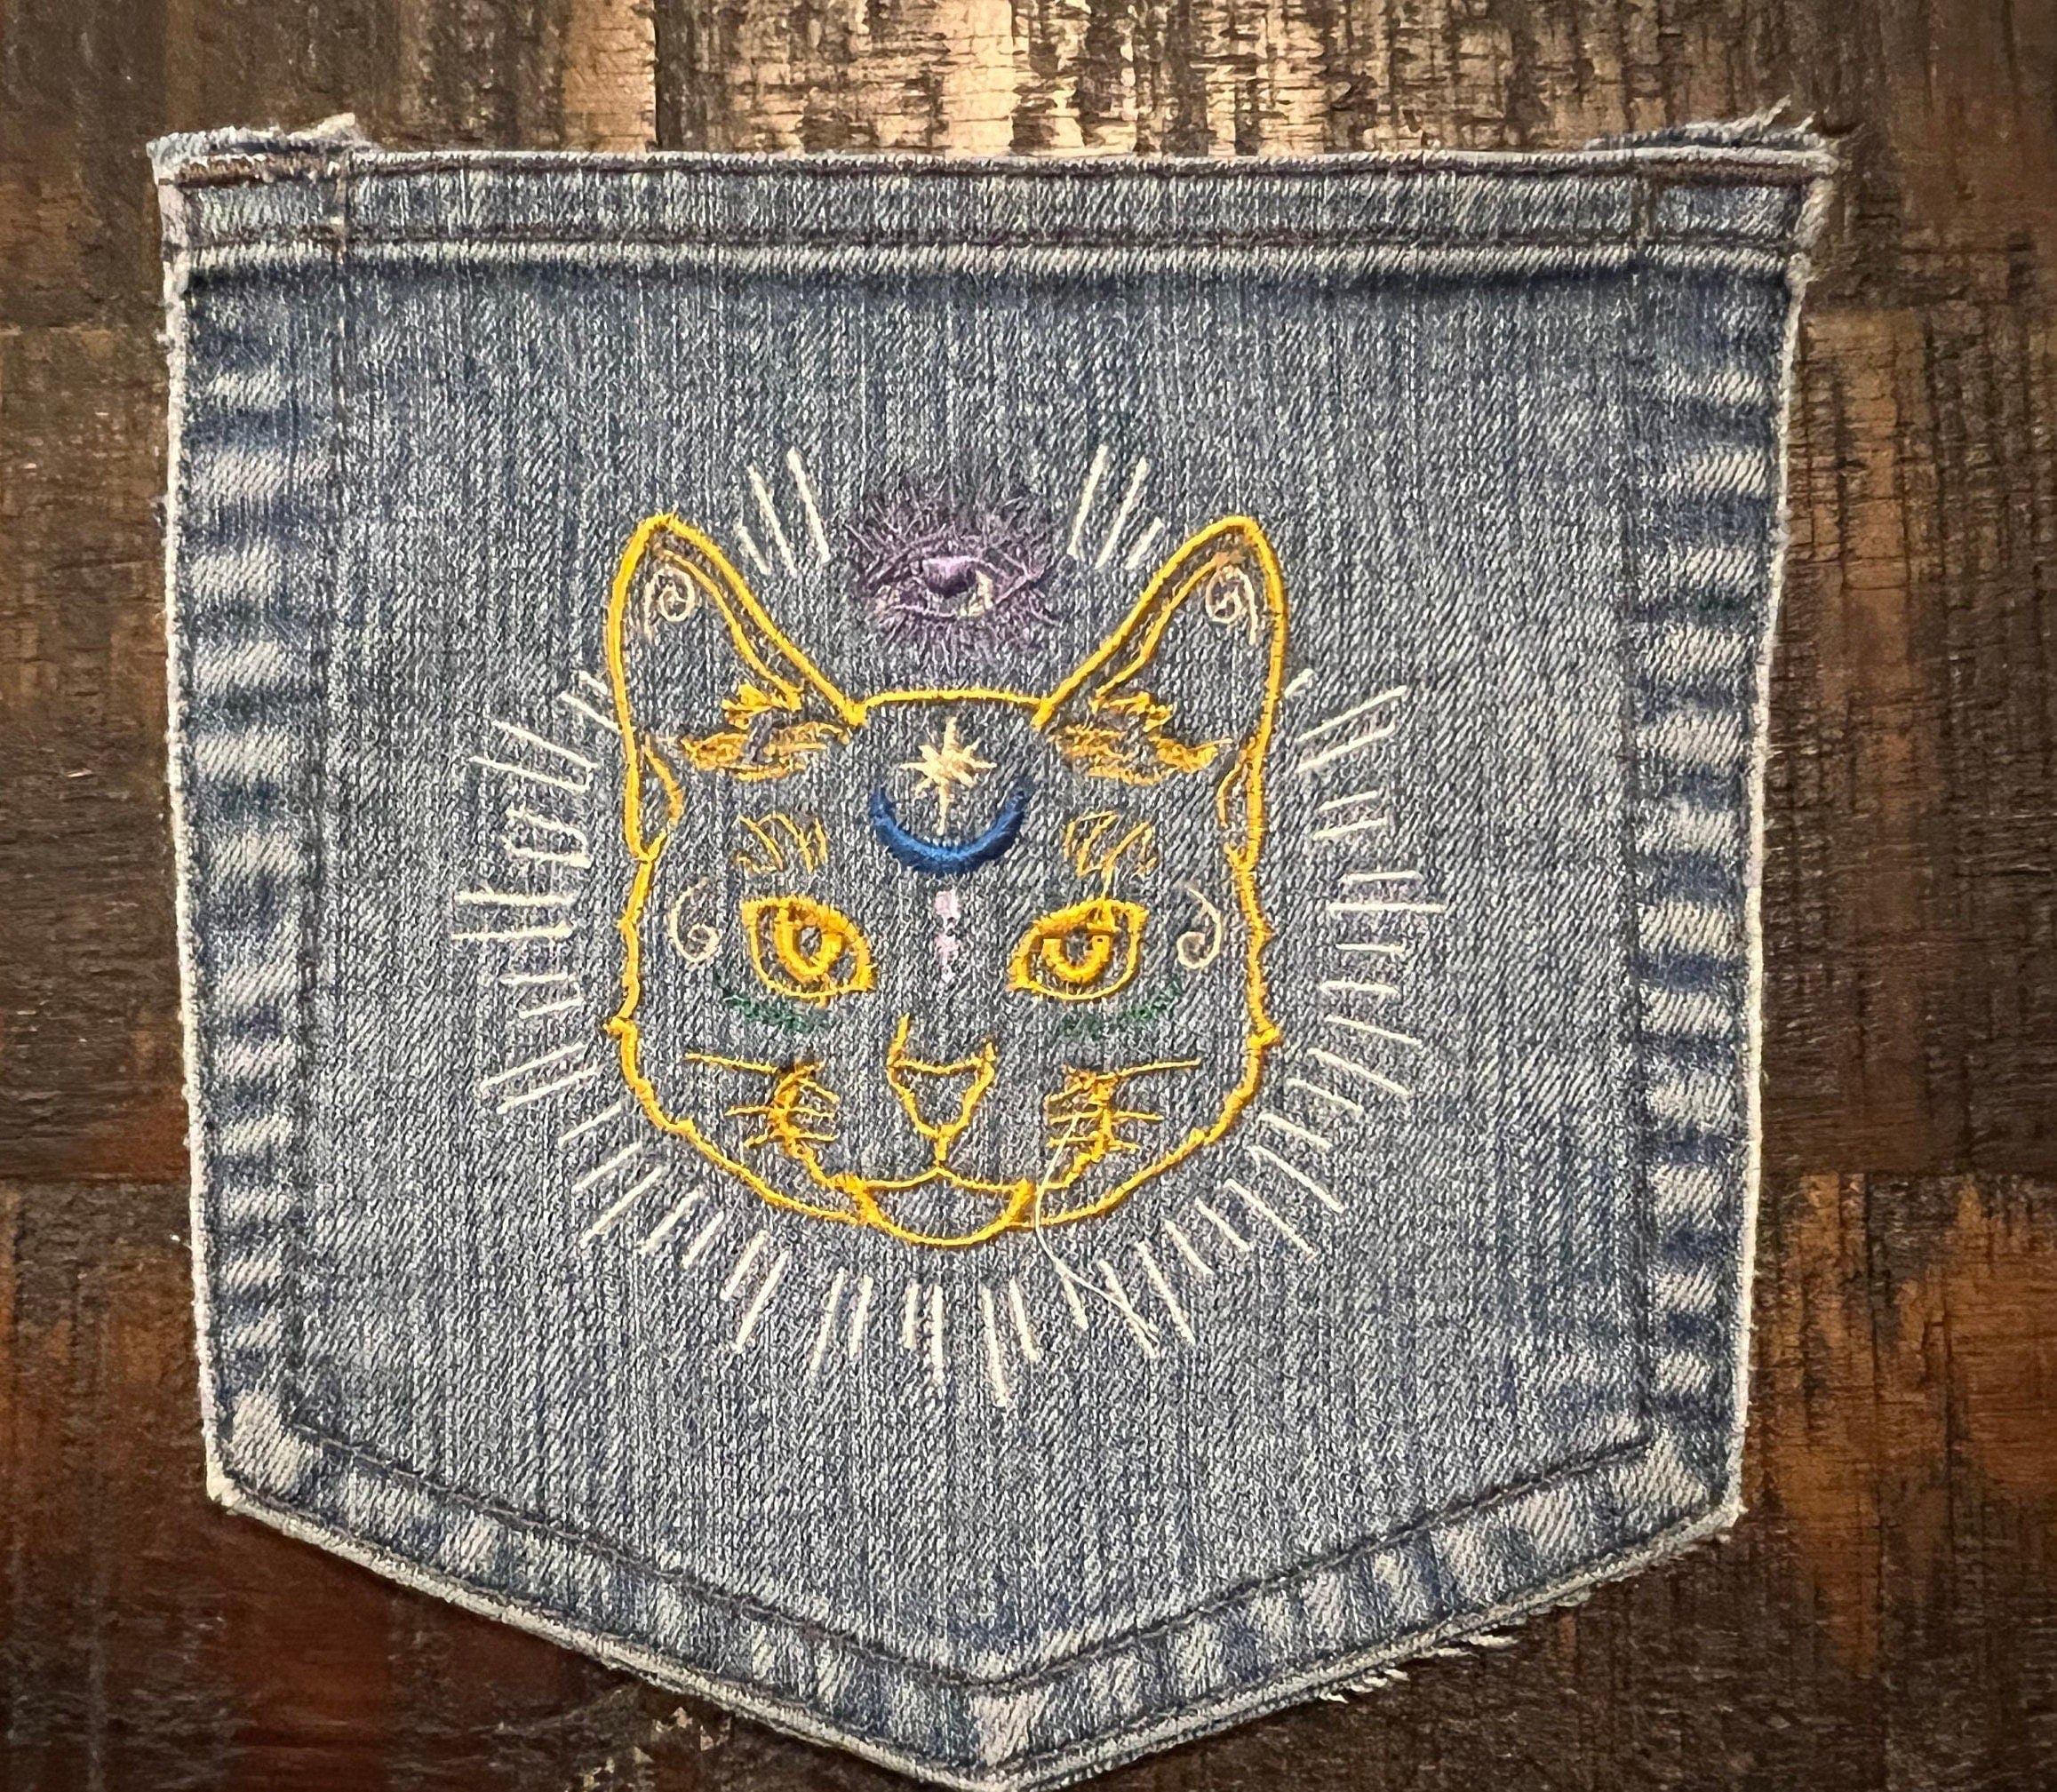 Mystic Kitty CAT HOT POCKET - embroidered Denim patch 6X6 Iron On Psychic Soule Patch Appliques & Patches